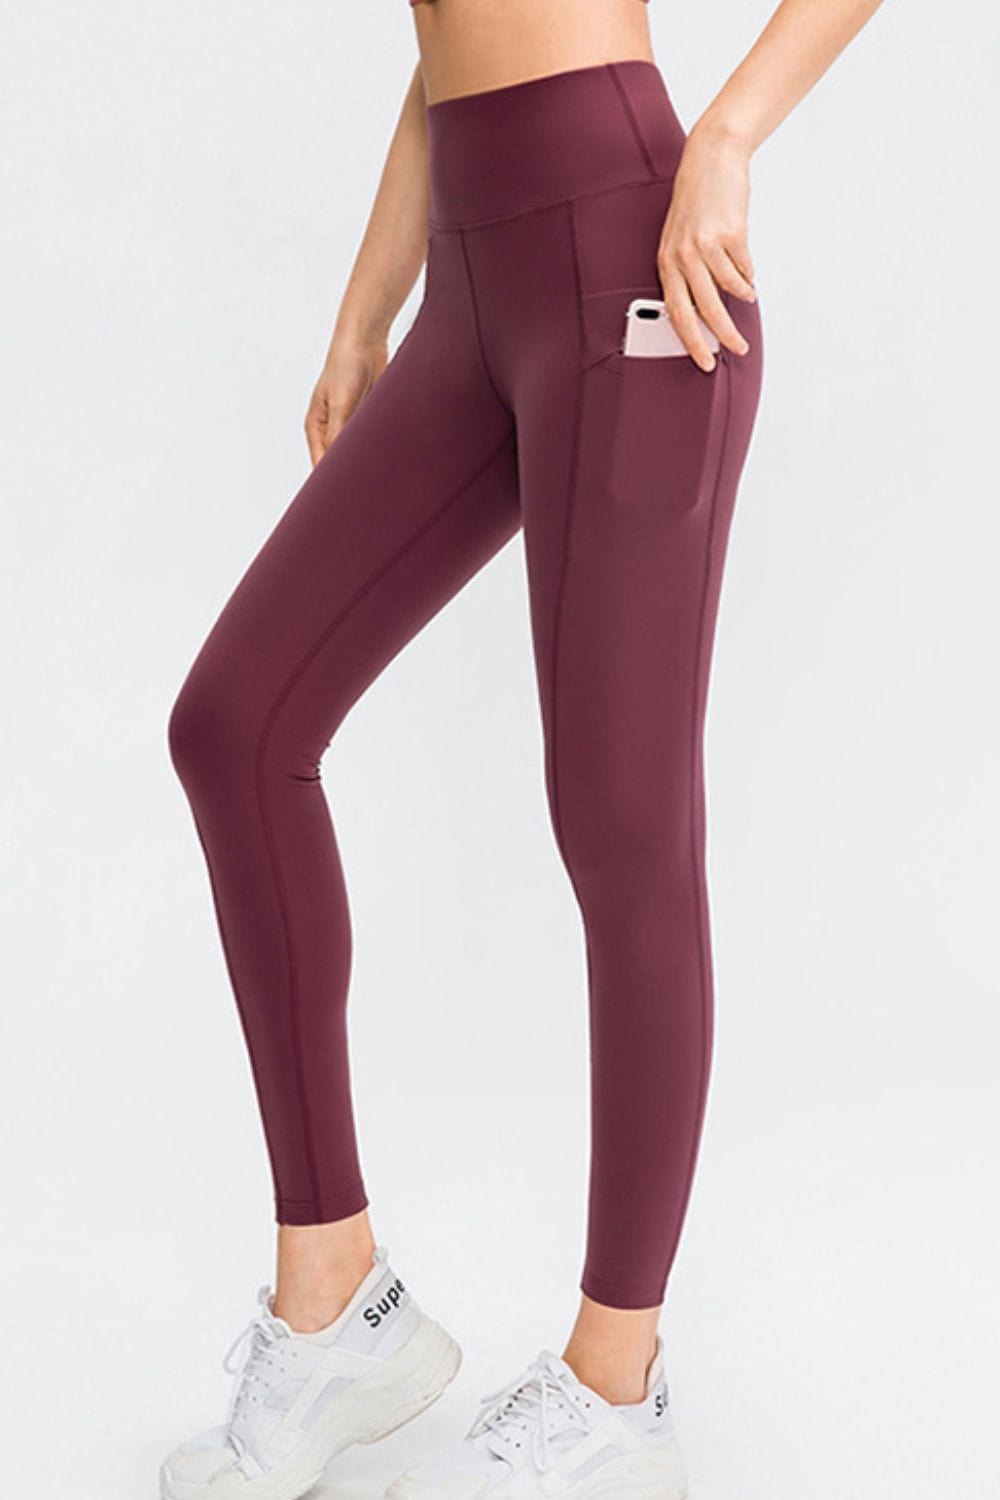 Wide Waistband Slim Fit Long Sports Pants with Pocket - Runway Frenzy 